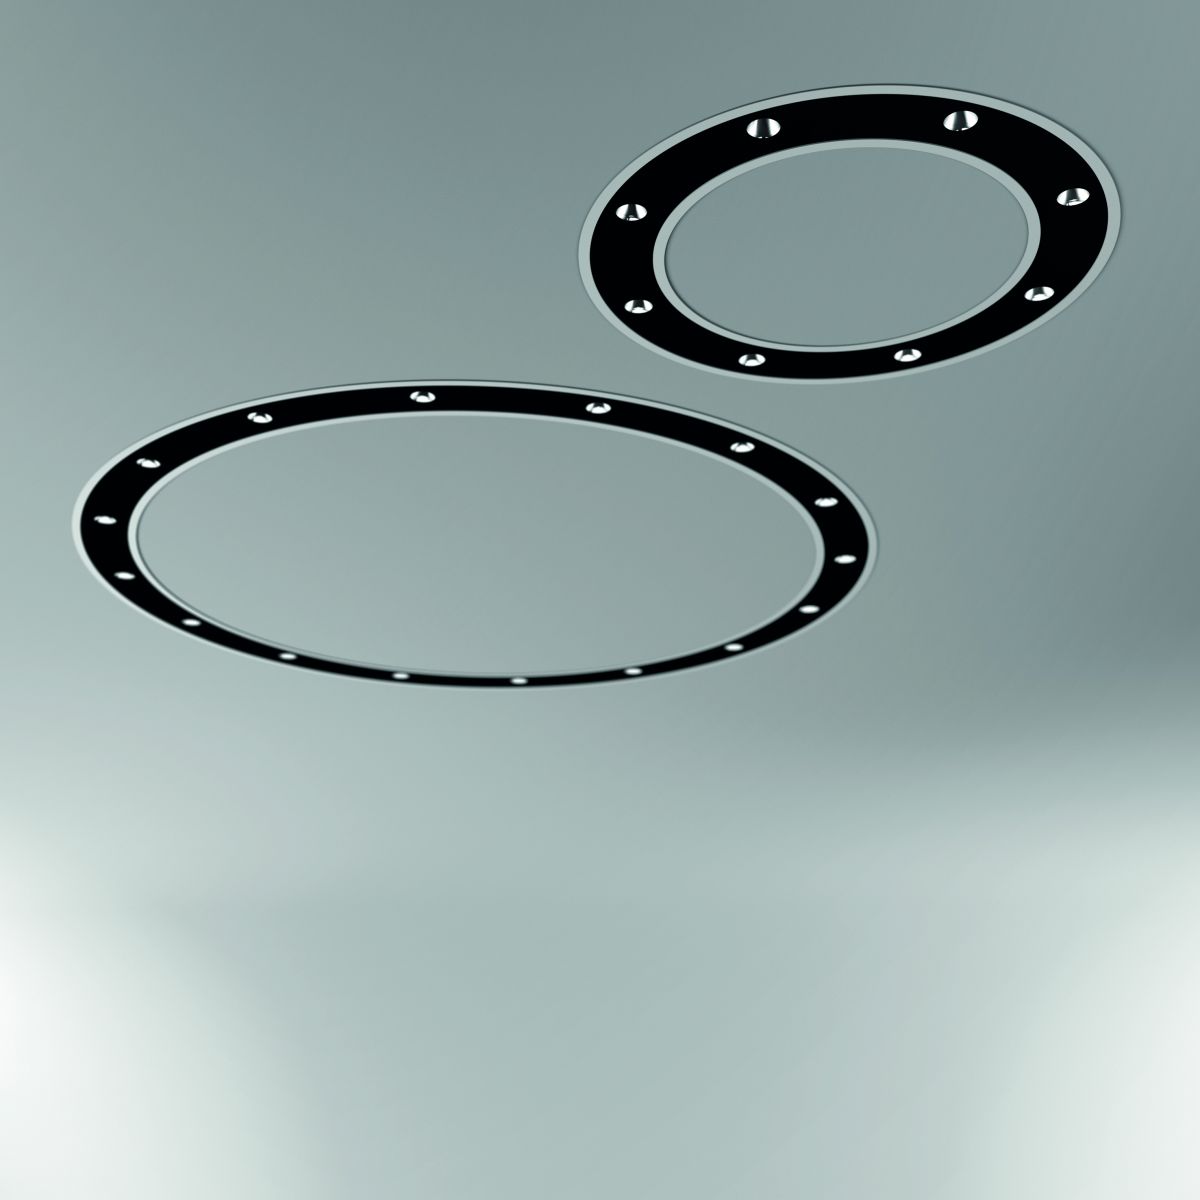 blore cup ring luminaire recessed 1200mm 4000k 4277lm 12x3w dali